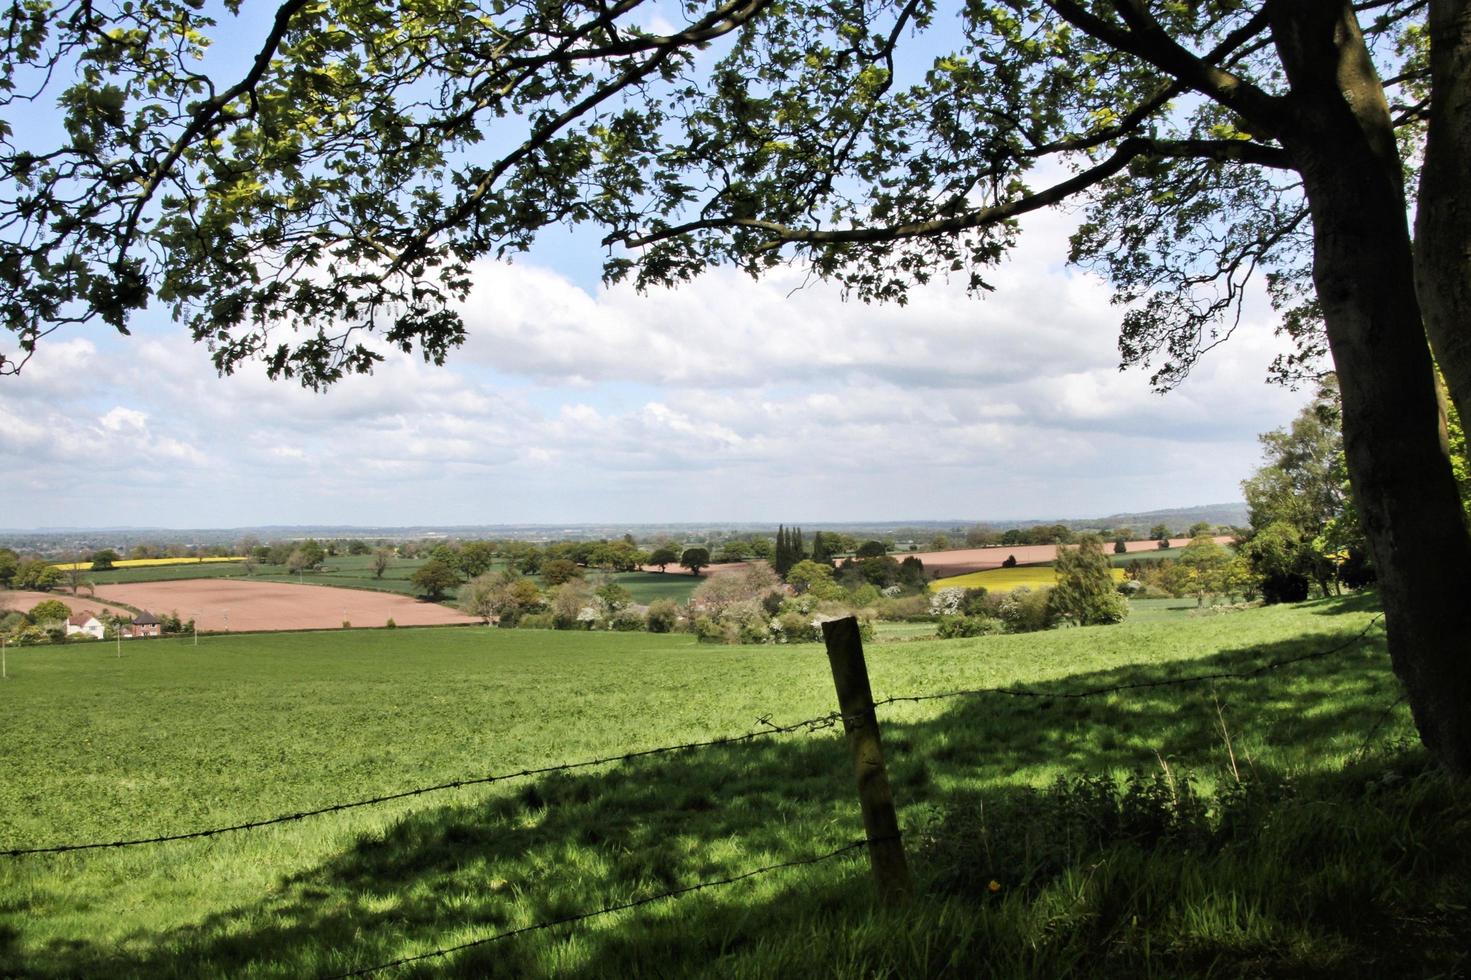 A view of the Shropshire Countryside near Grinshill photo